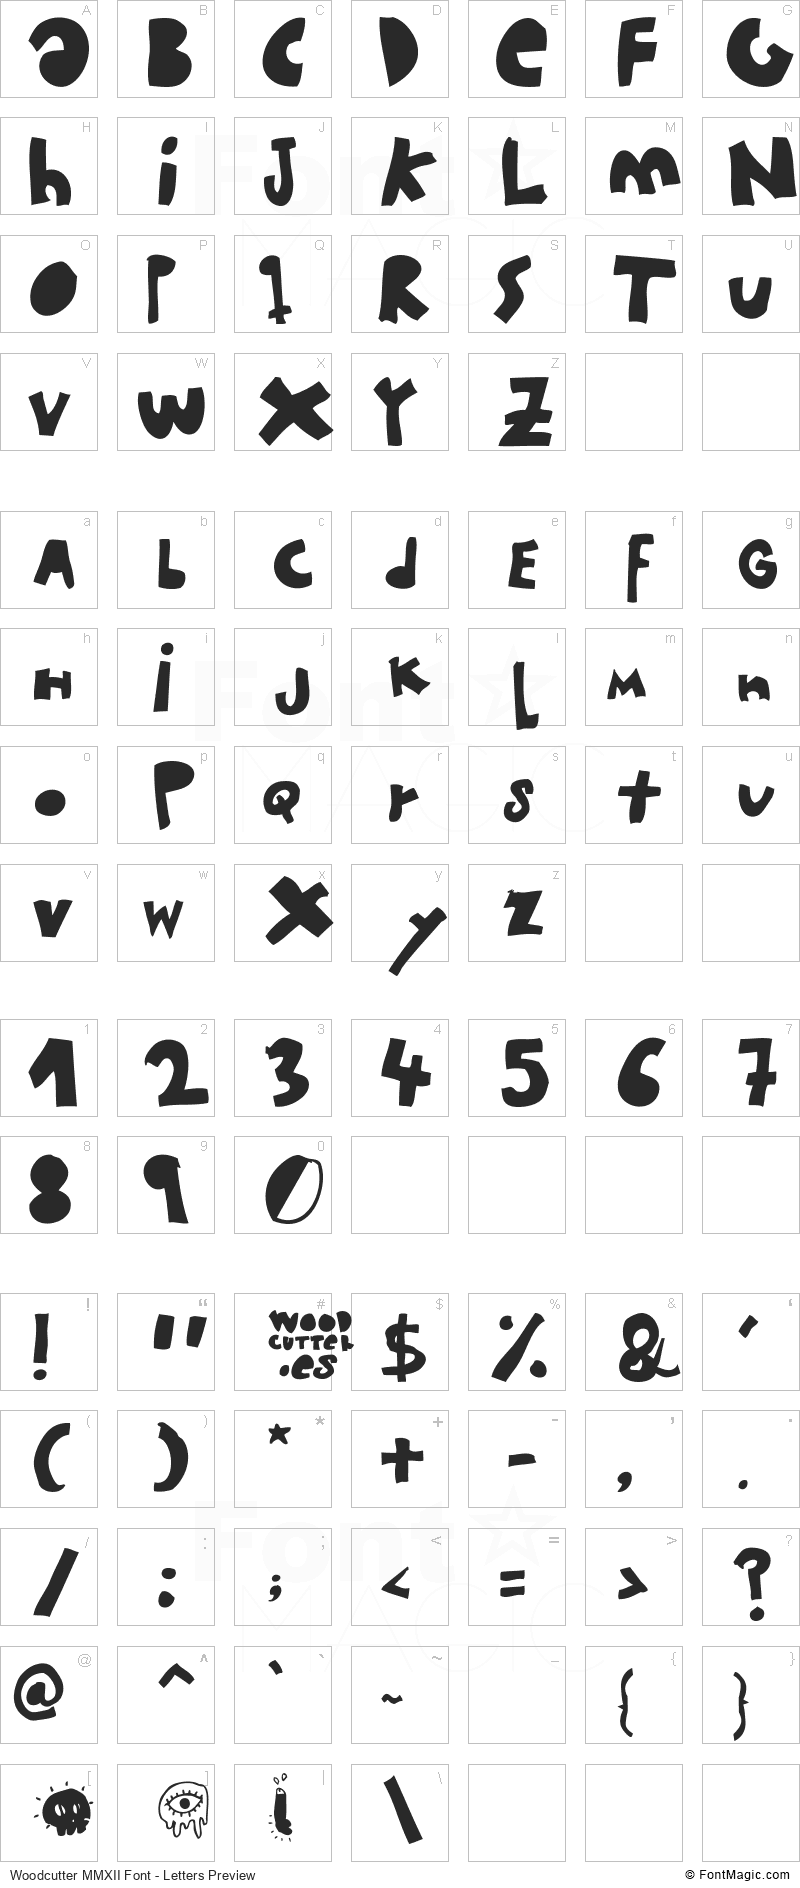 Woodcutter MMXII Font - All Latters Preview Chart